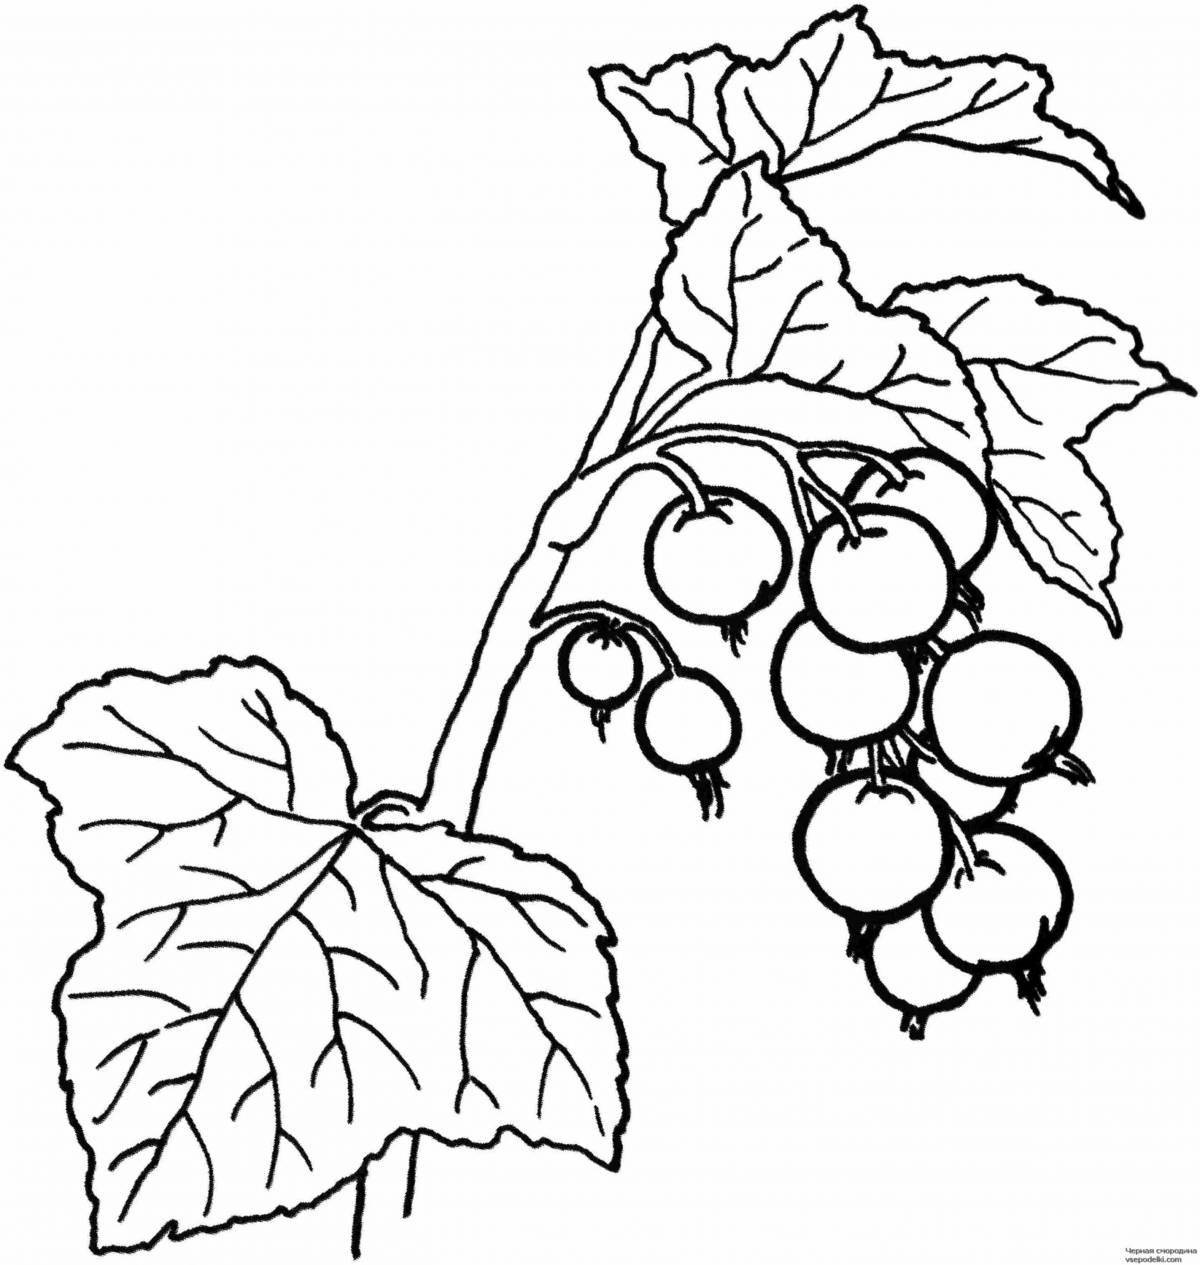 Coloring book sweet berries and fruits for kids